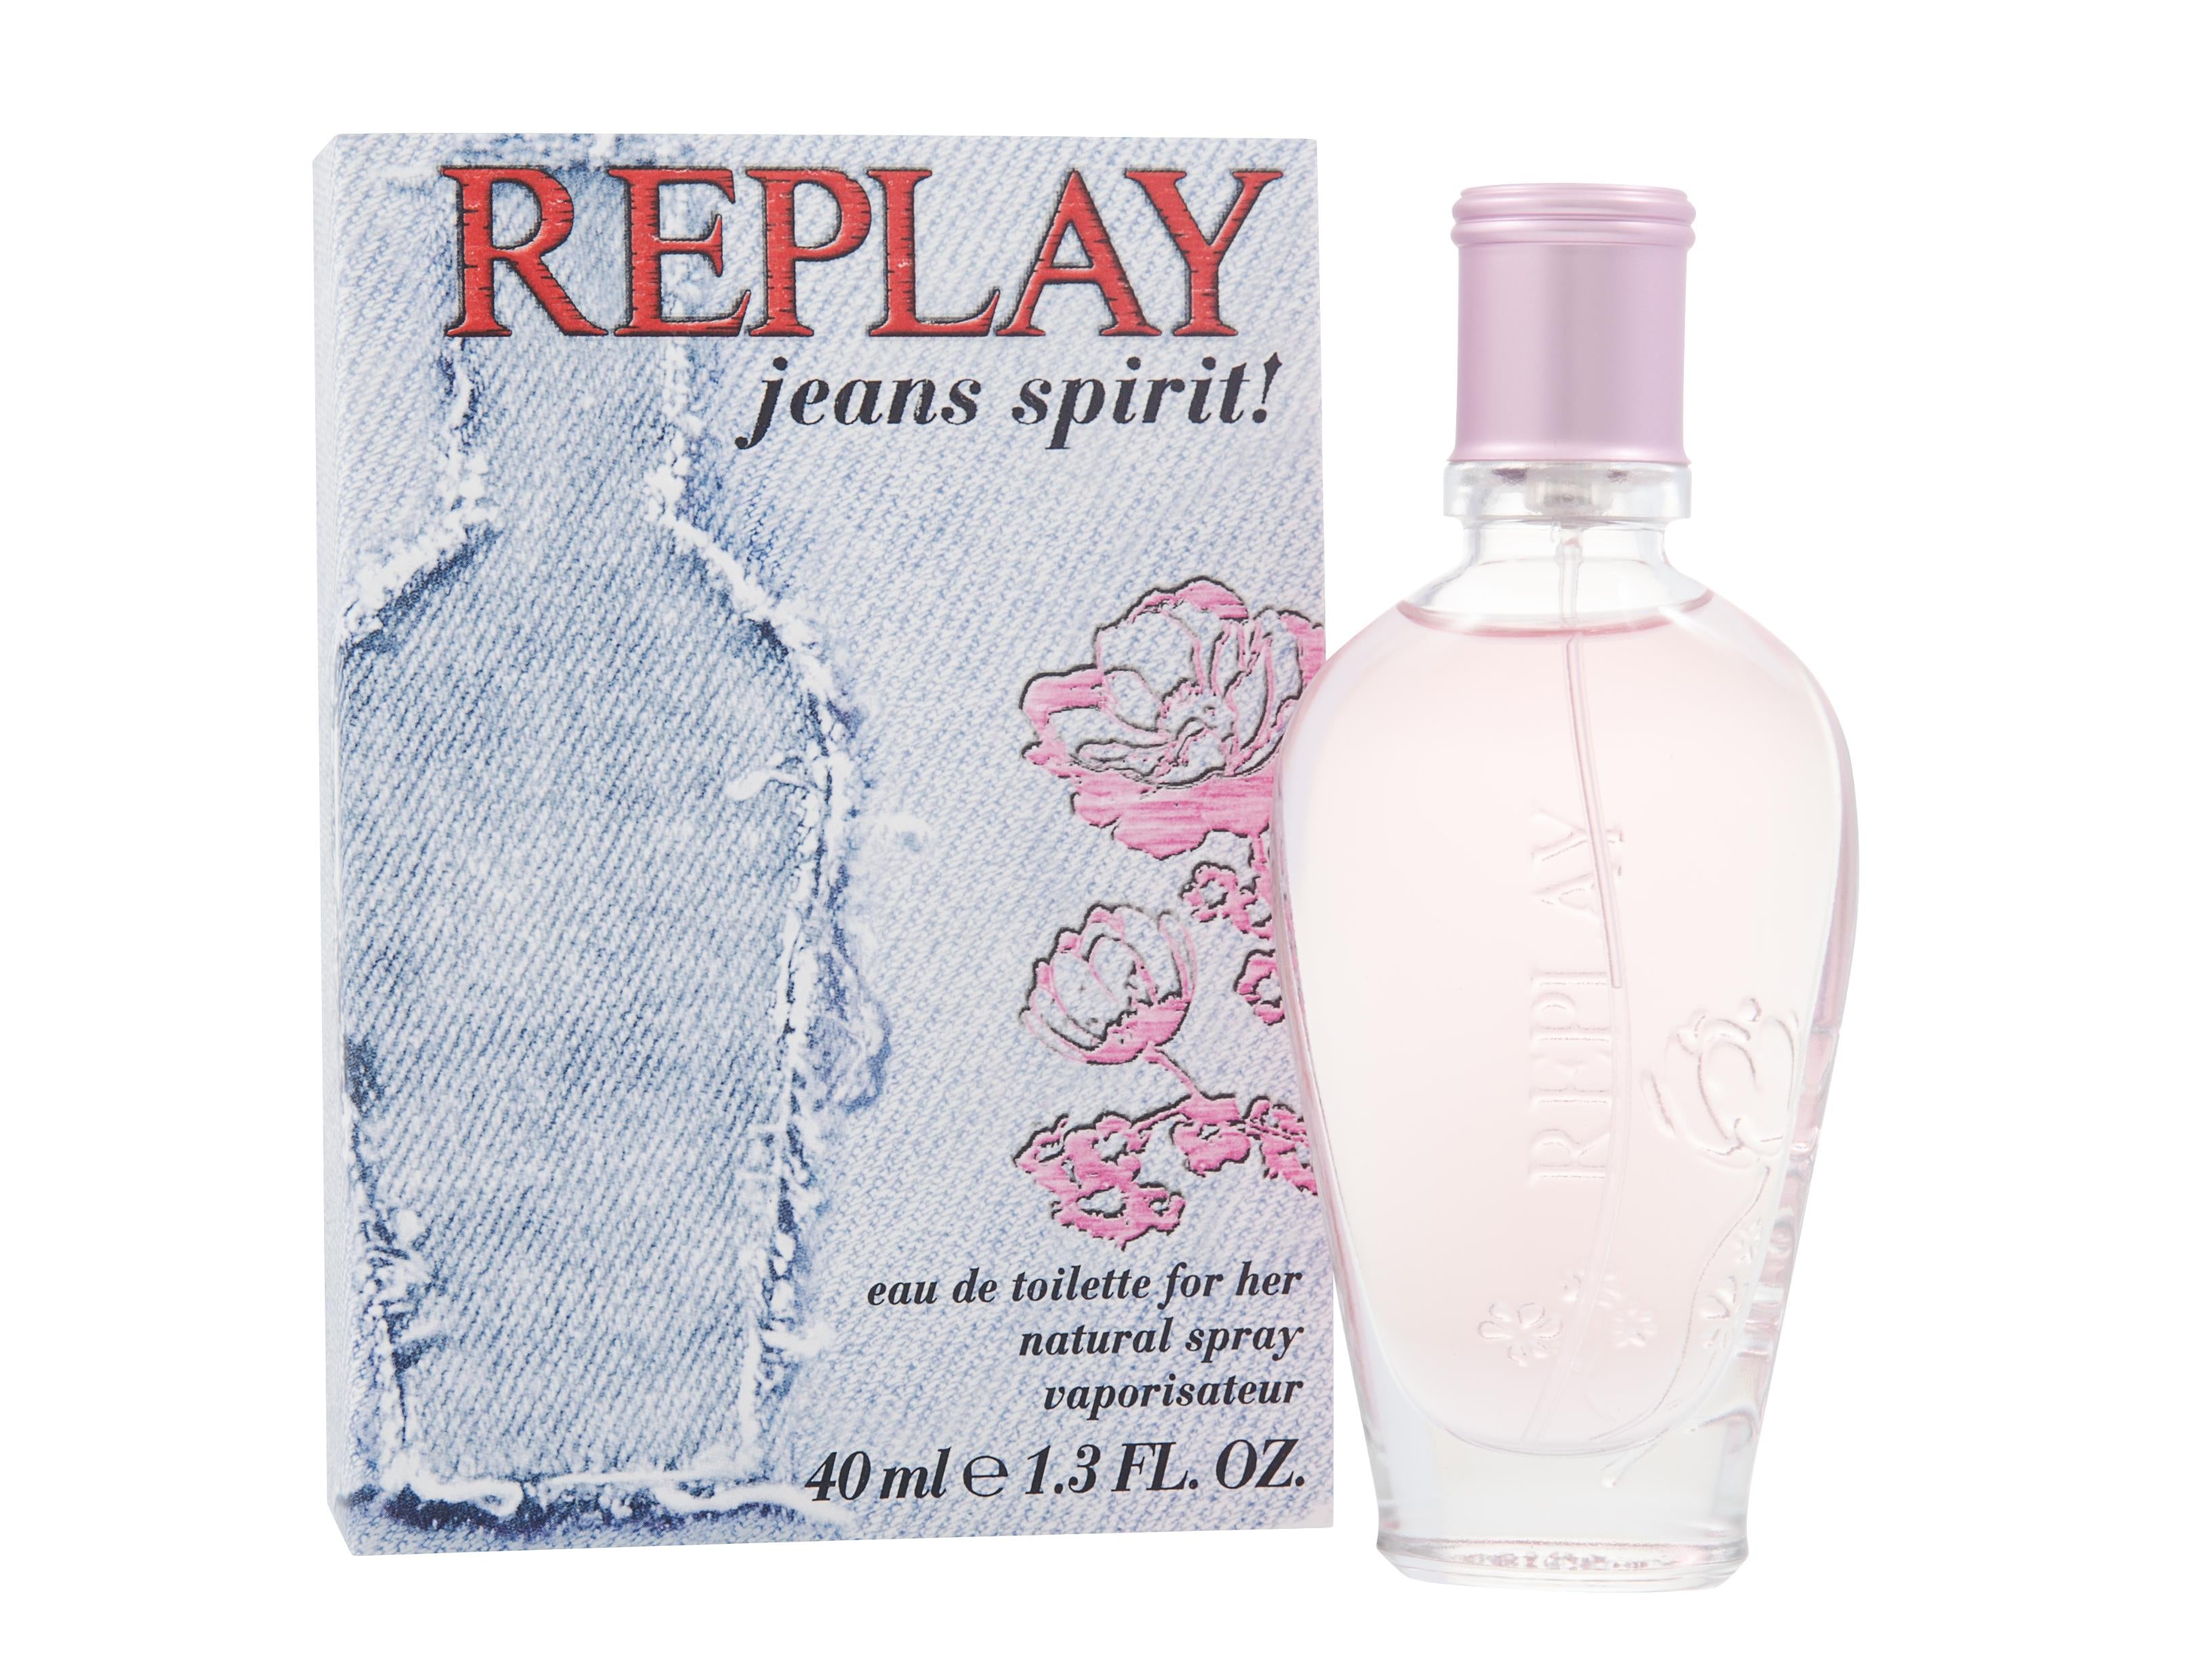 View Replay Jeans Spirit for Her Eau de Toilette 40ml Spray information